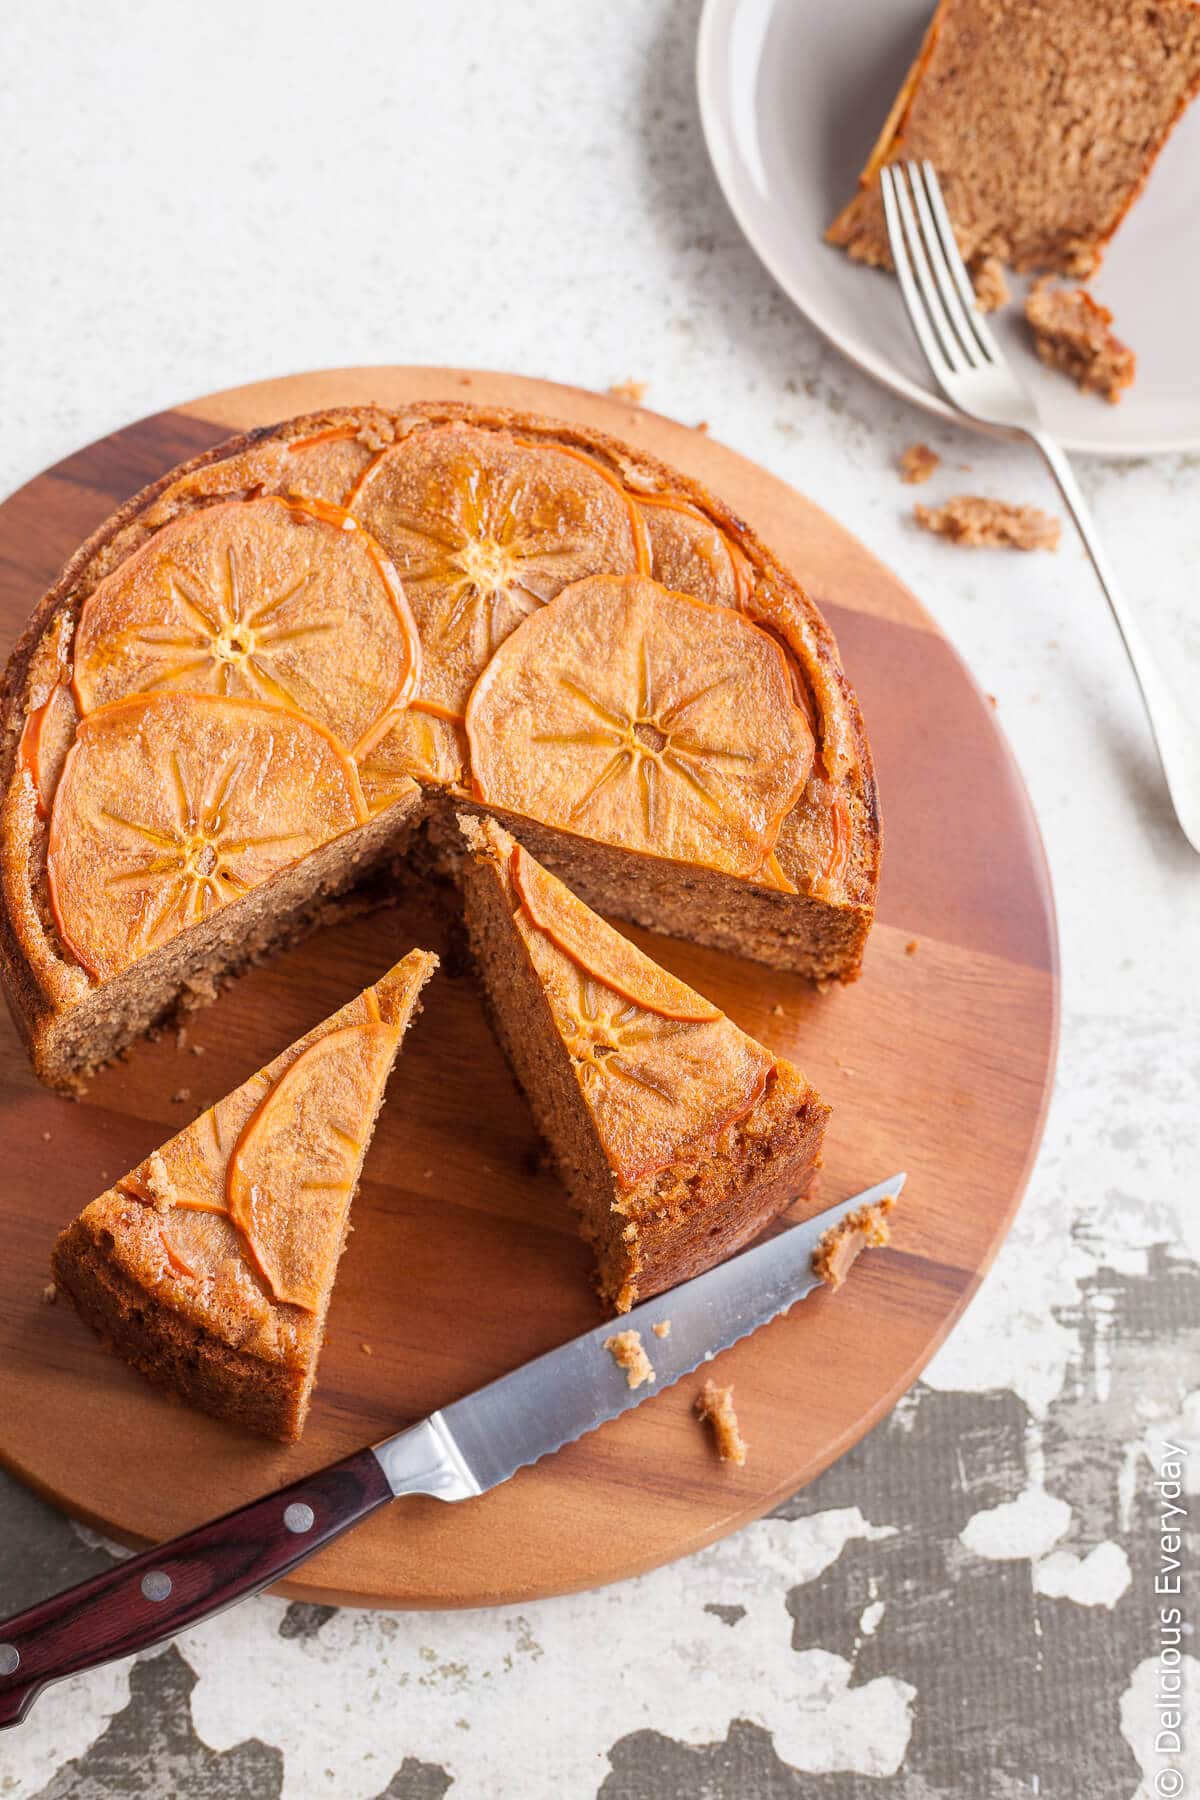 This gorgeous spiced upside down persimmon cake topped with finely sliced persimmon in maple syrup is a great introduction to persimmons. | Click for the recipe